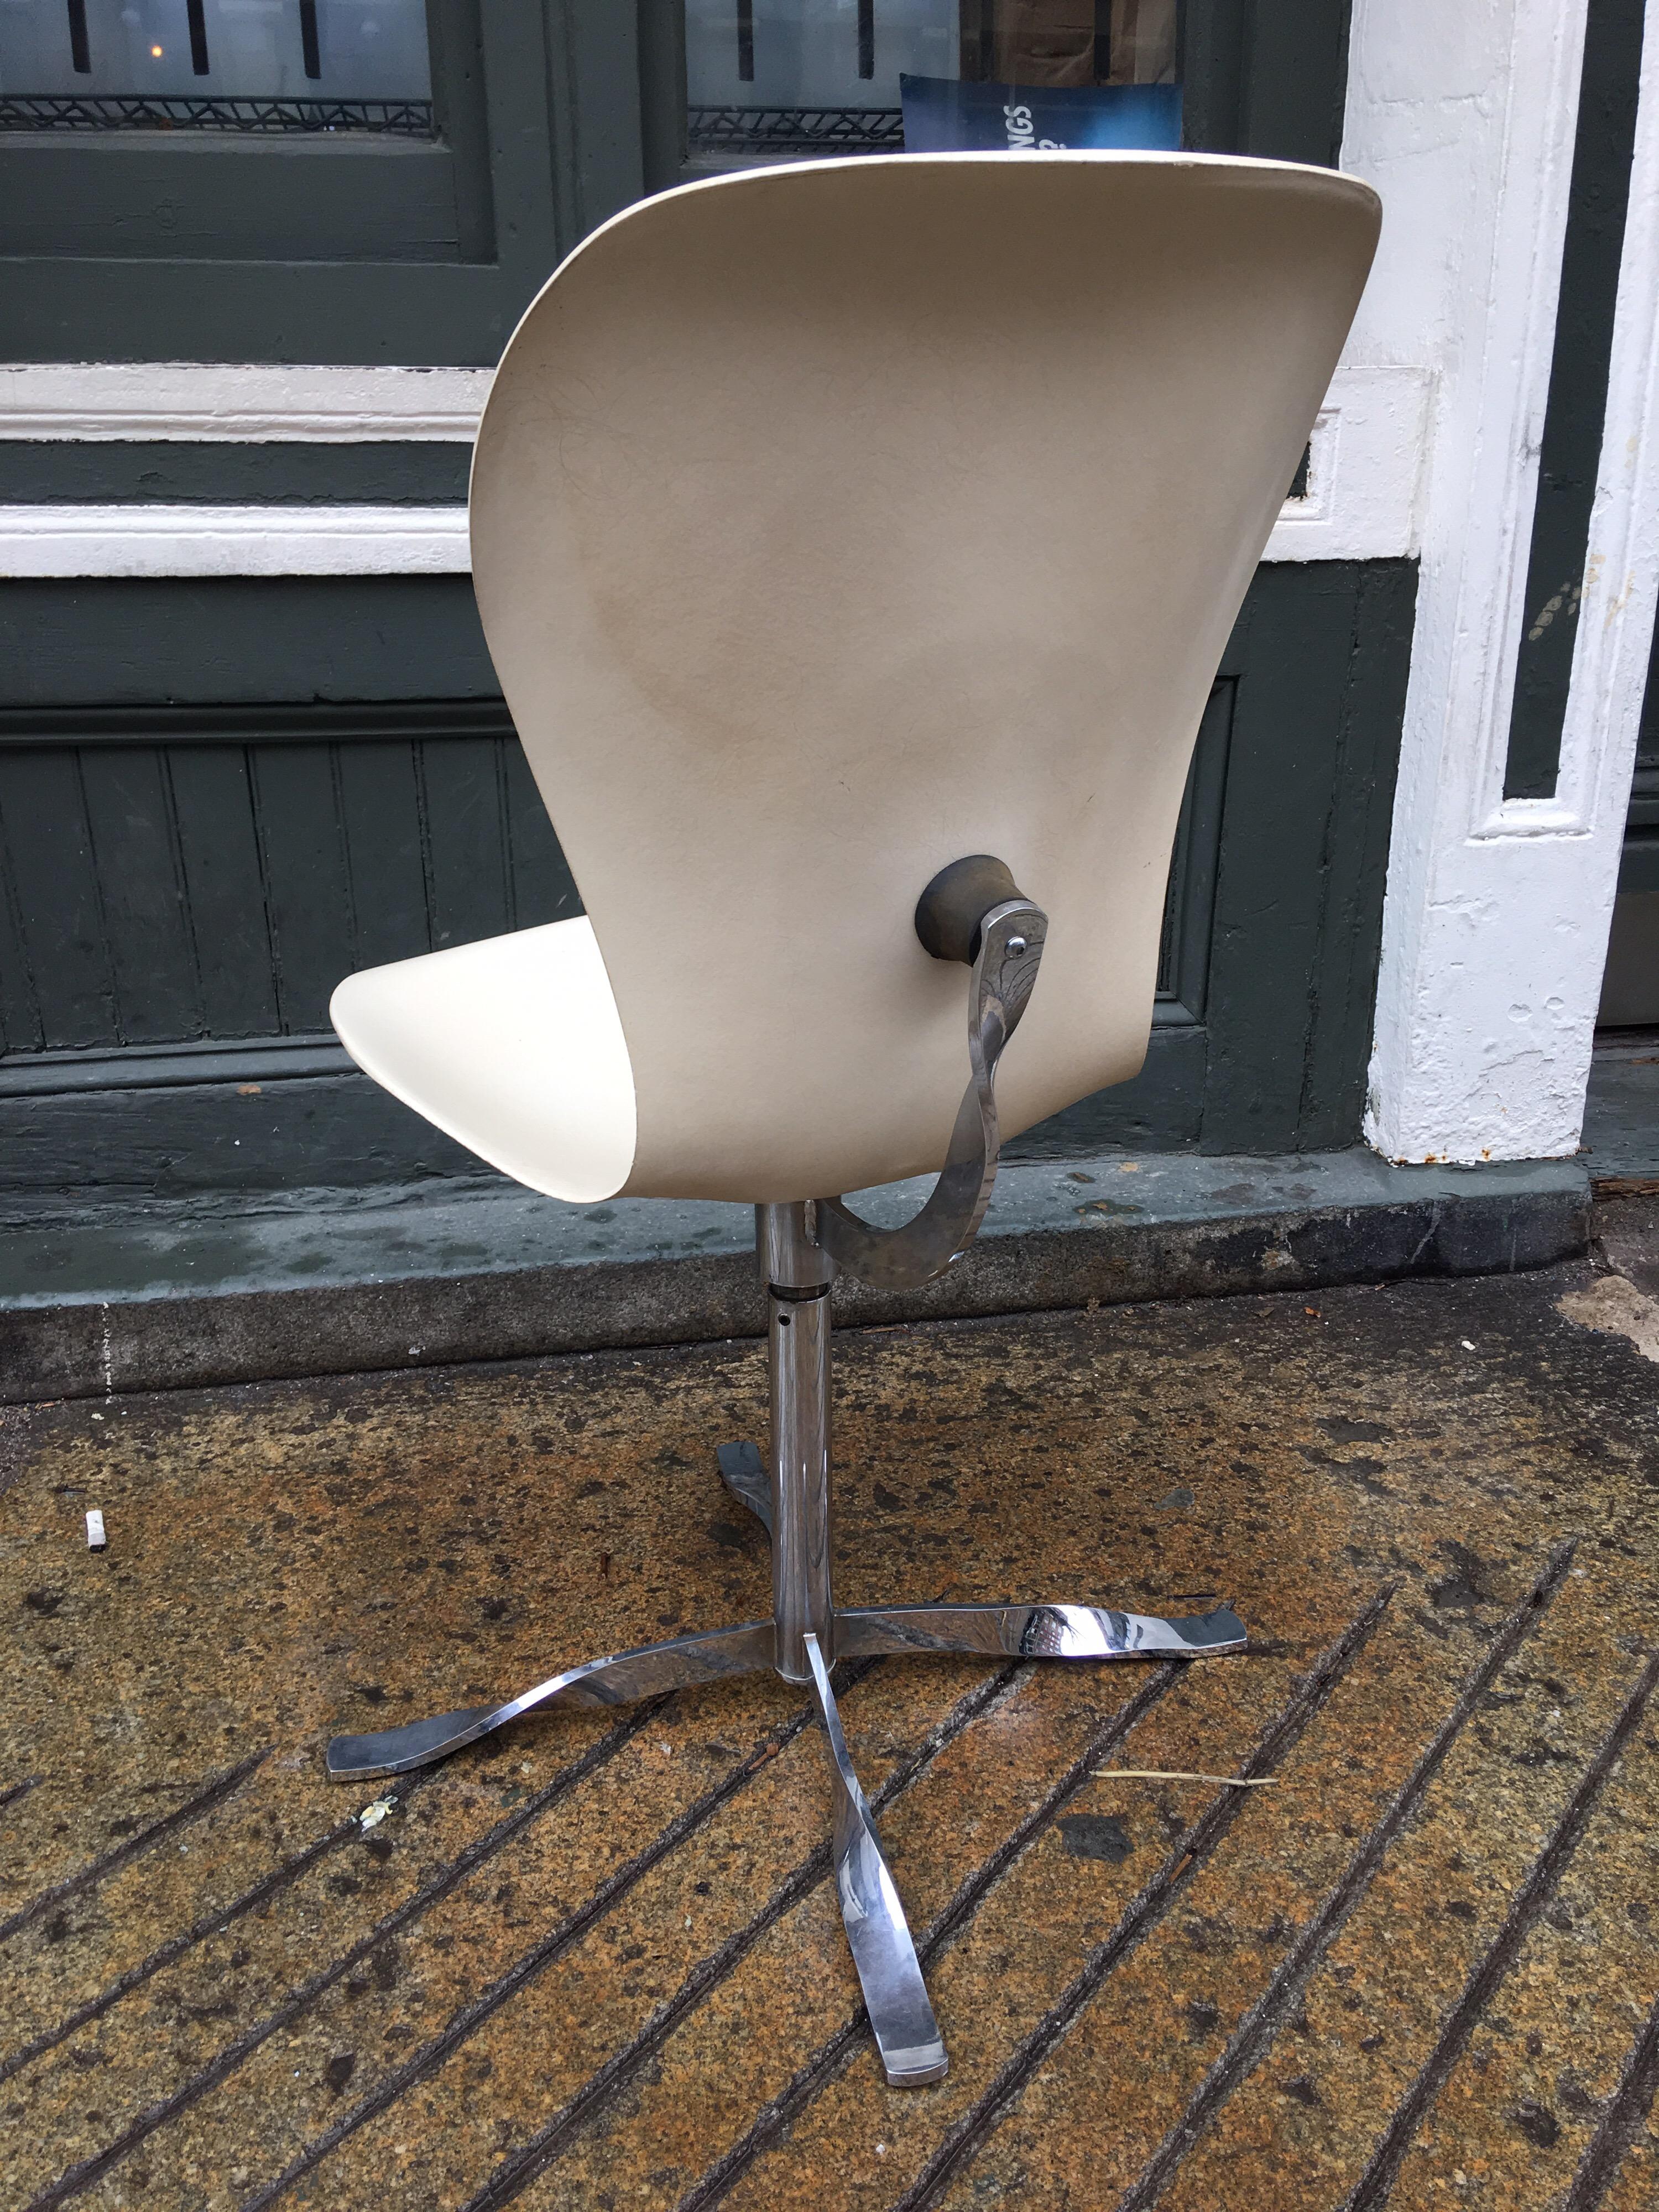 Gideon Kramer ion chair with white fiberglass shell and chrome supports. This chair swivels and flexes with the rubber bushings connecting it to the steel frame. Remnants of a blue decal label remain. Chairs was designed and first made in 1962 in